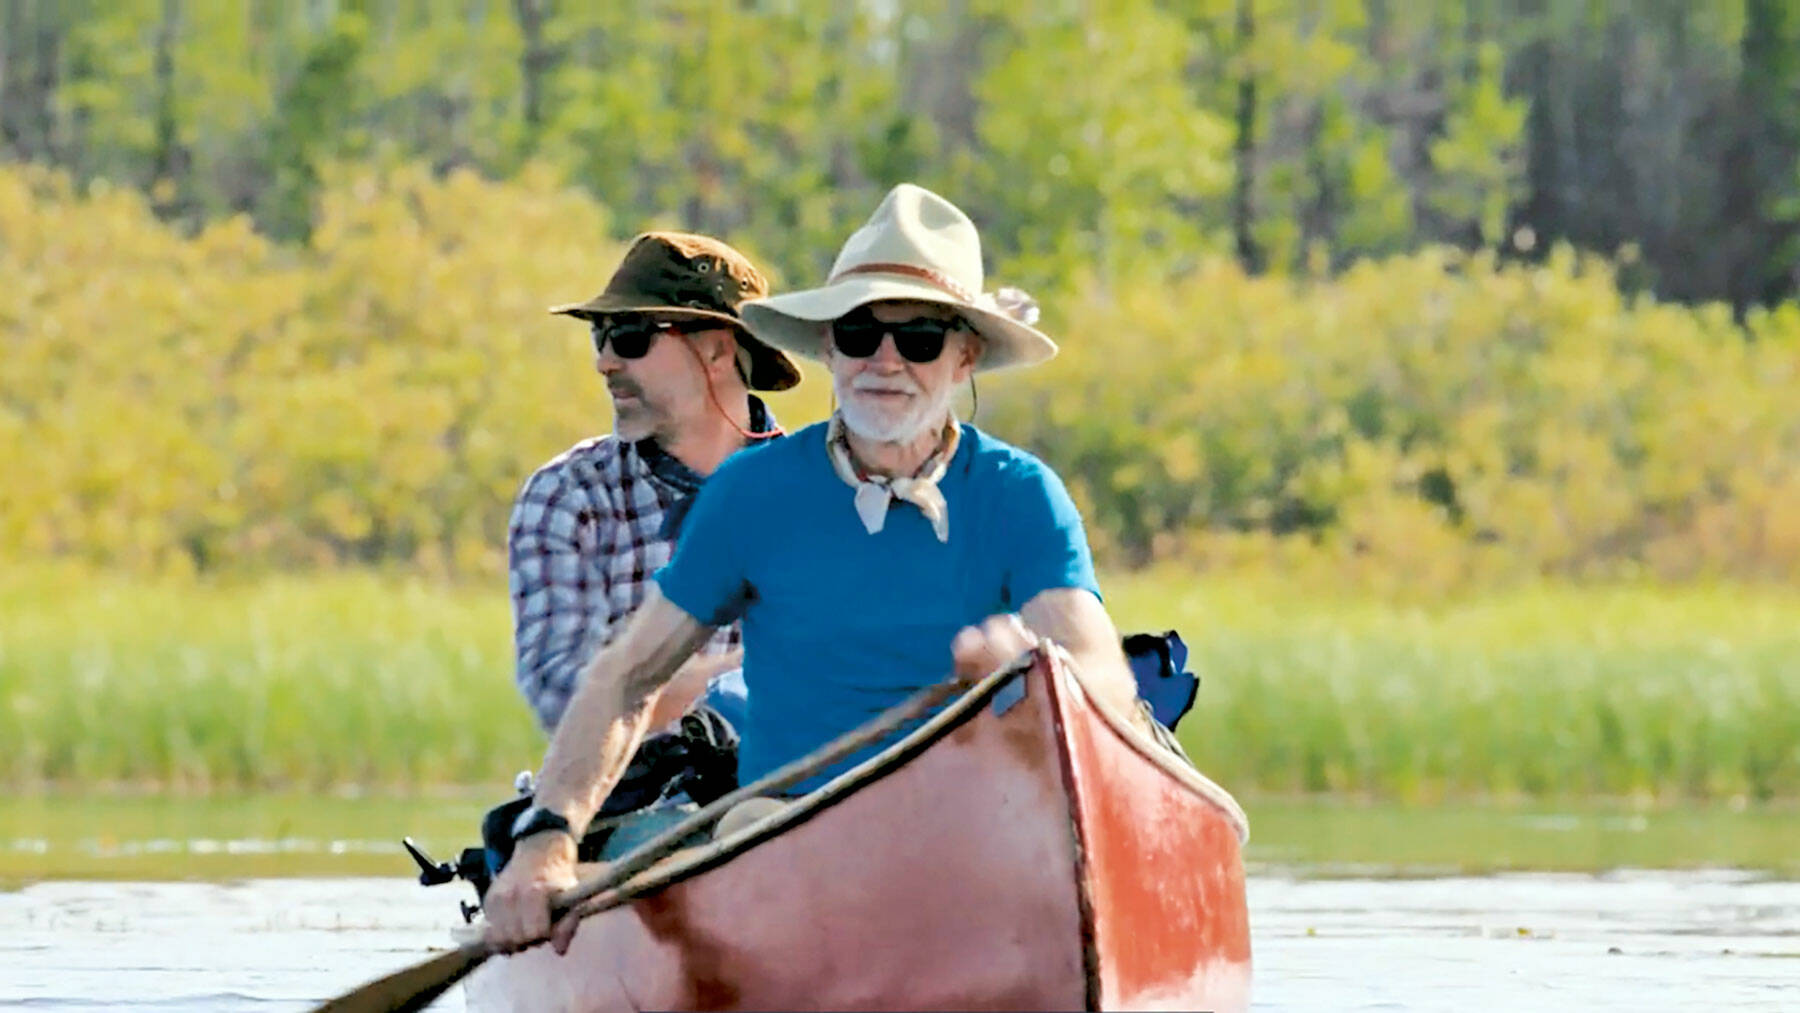 “The Long Today,” about a Saskatchewan canoe trip to mark a man’s 70th birthday, is one of the short films in the “Jane’s Faves” package available for streaming this week from the Port Townsend Film Festival. (Port Townsend Film Festival)